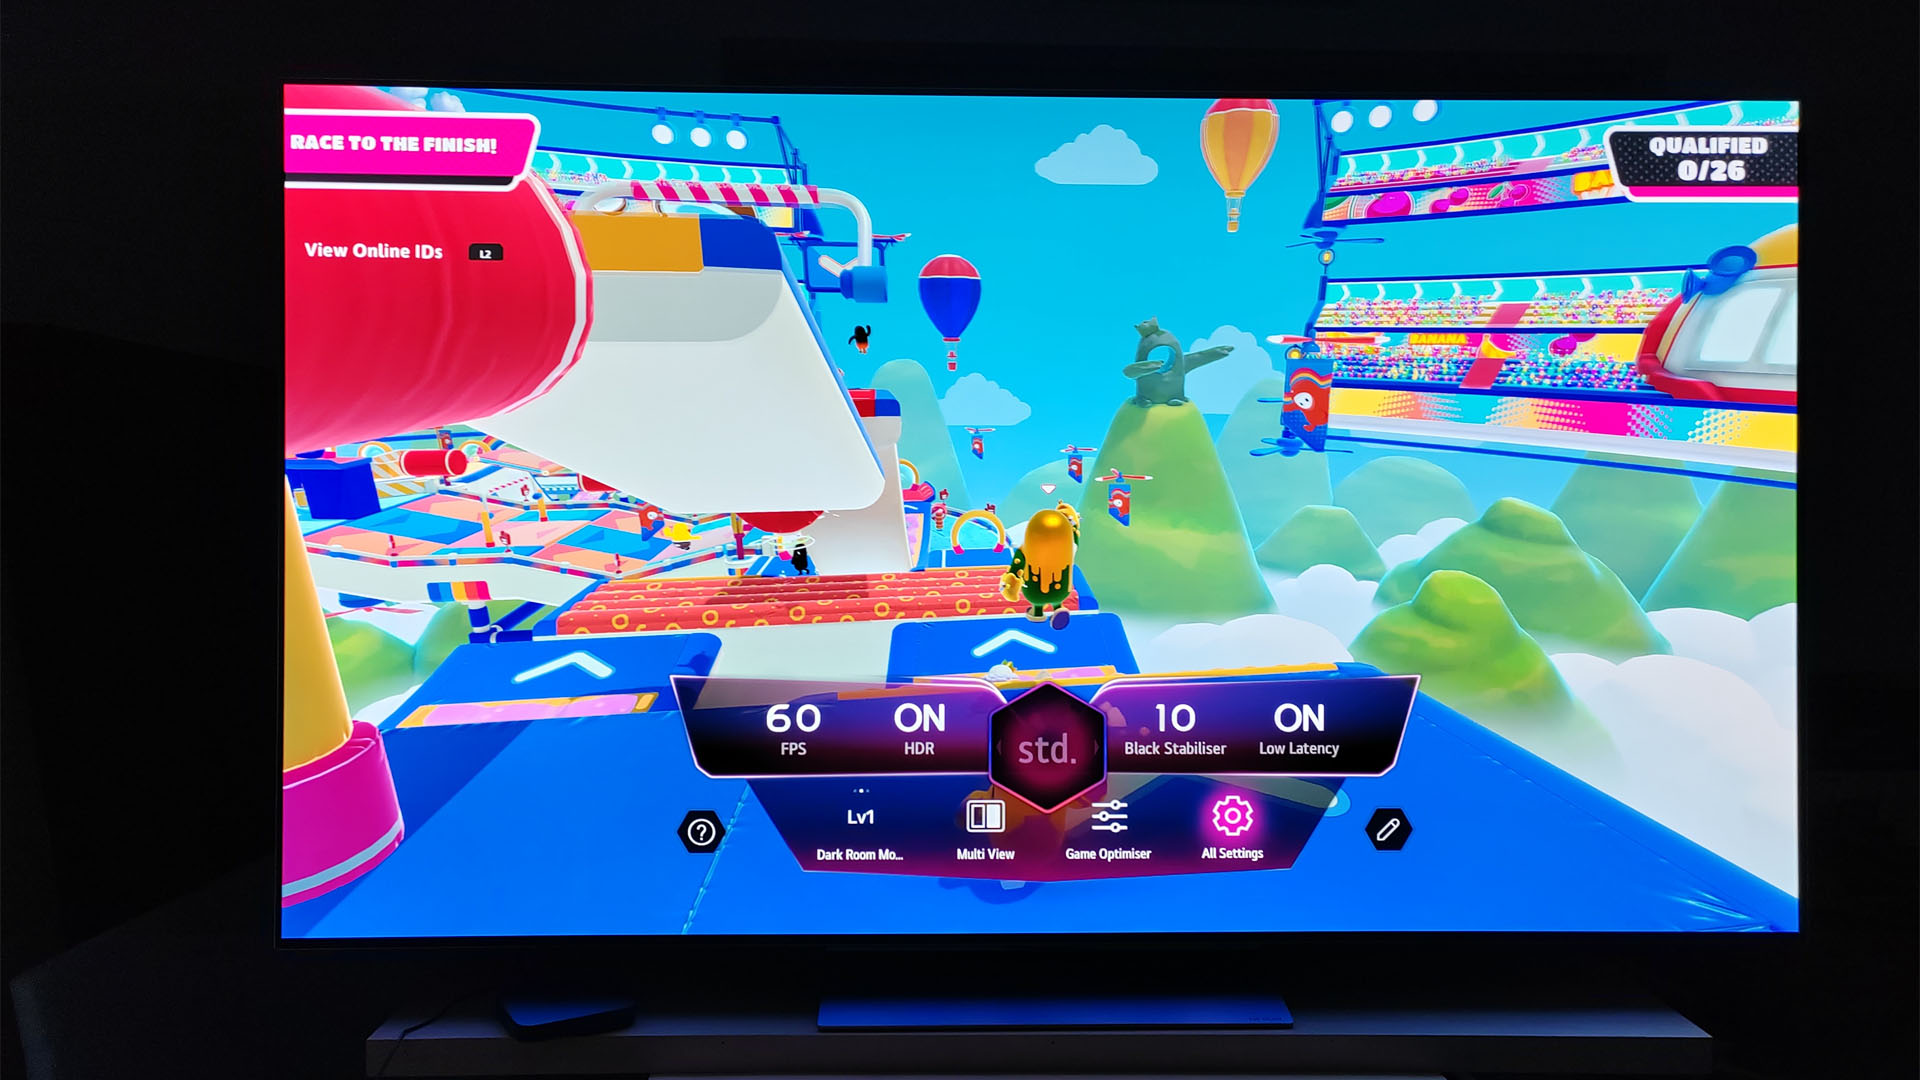 LG OLED G3's in-game UI showing a summary of its gamer features and settings - displayed over a game of fall guys